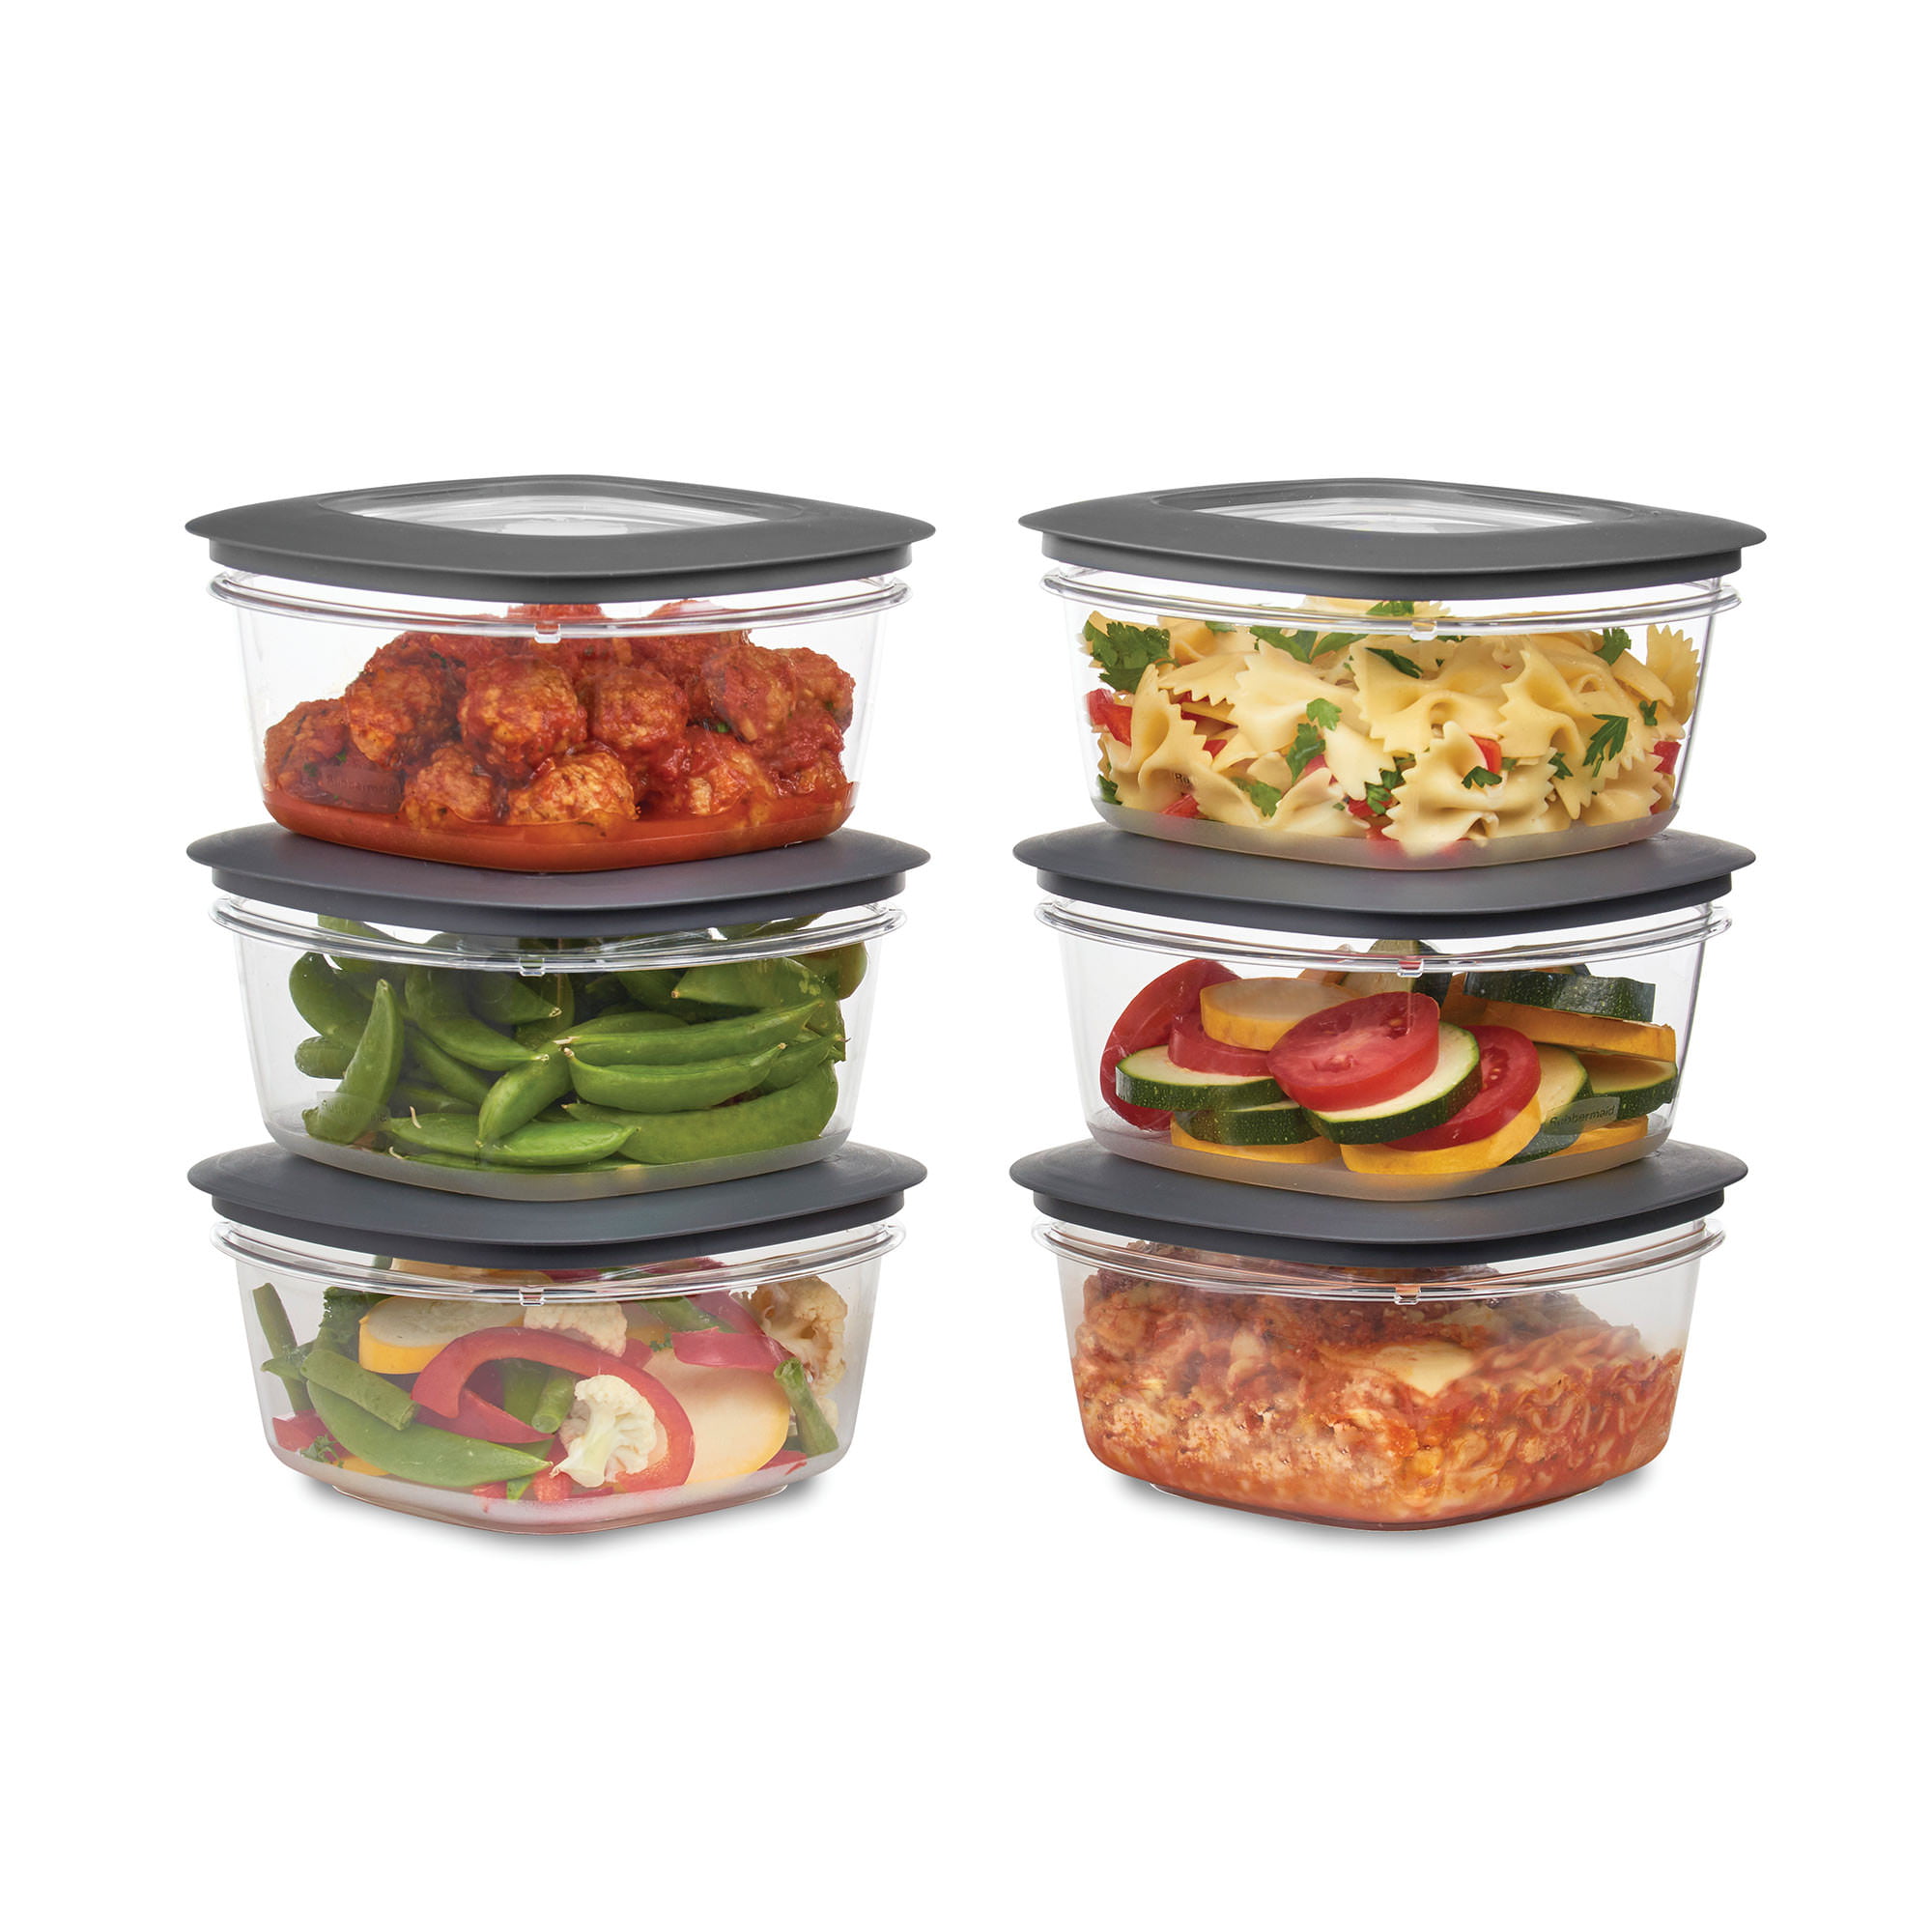 4-Pack Rubbermaid 1937691 Premier Food Storage Container Grey 5 Cup Set of 4 NEW 